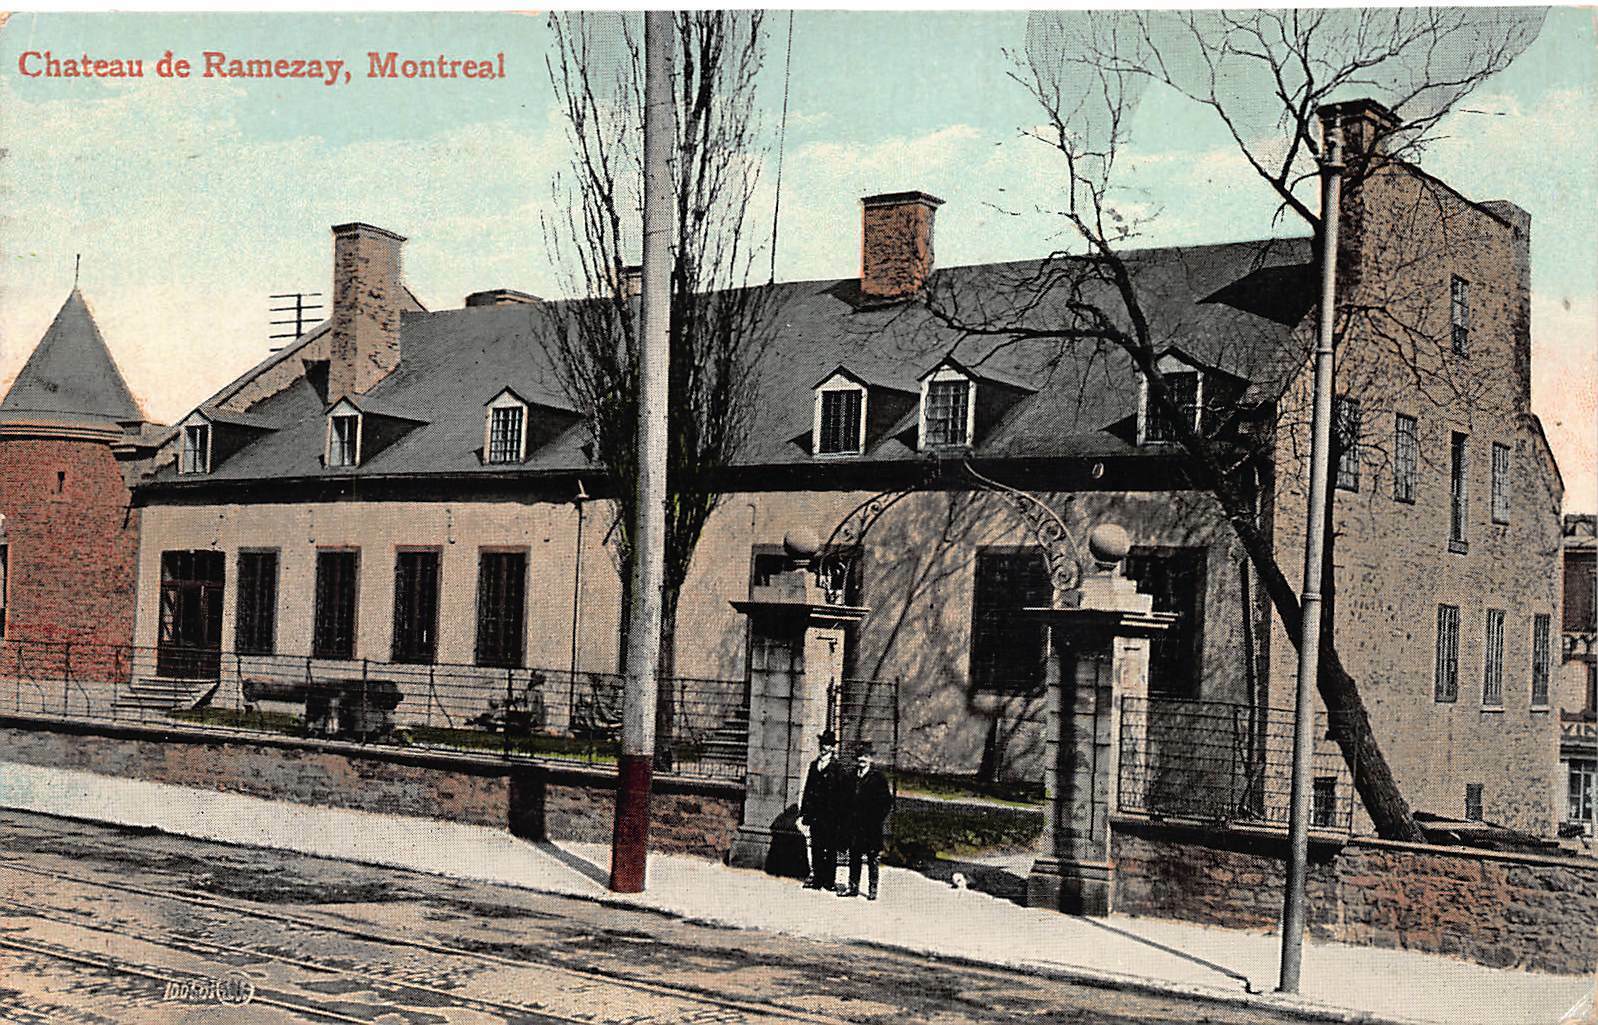 Chateau de Ramezay, Montreal, Quebec, Canada, Early Postcard, Used in 1910